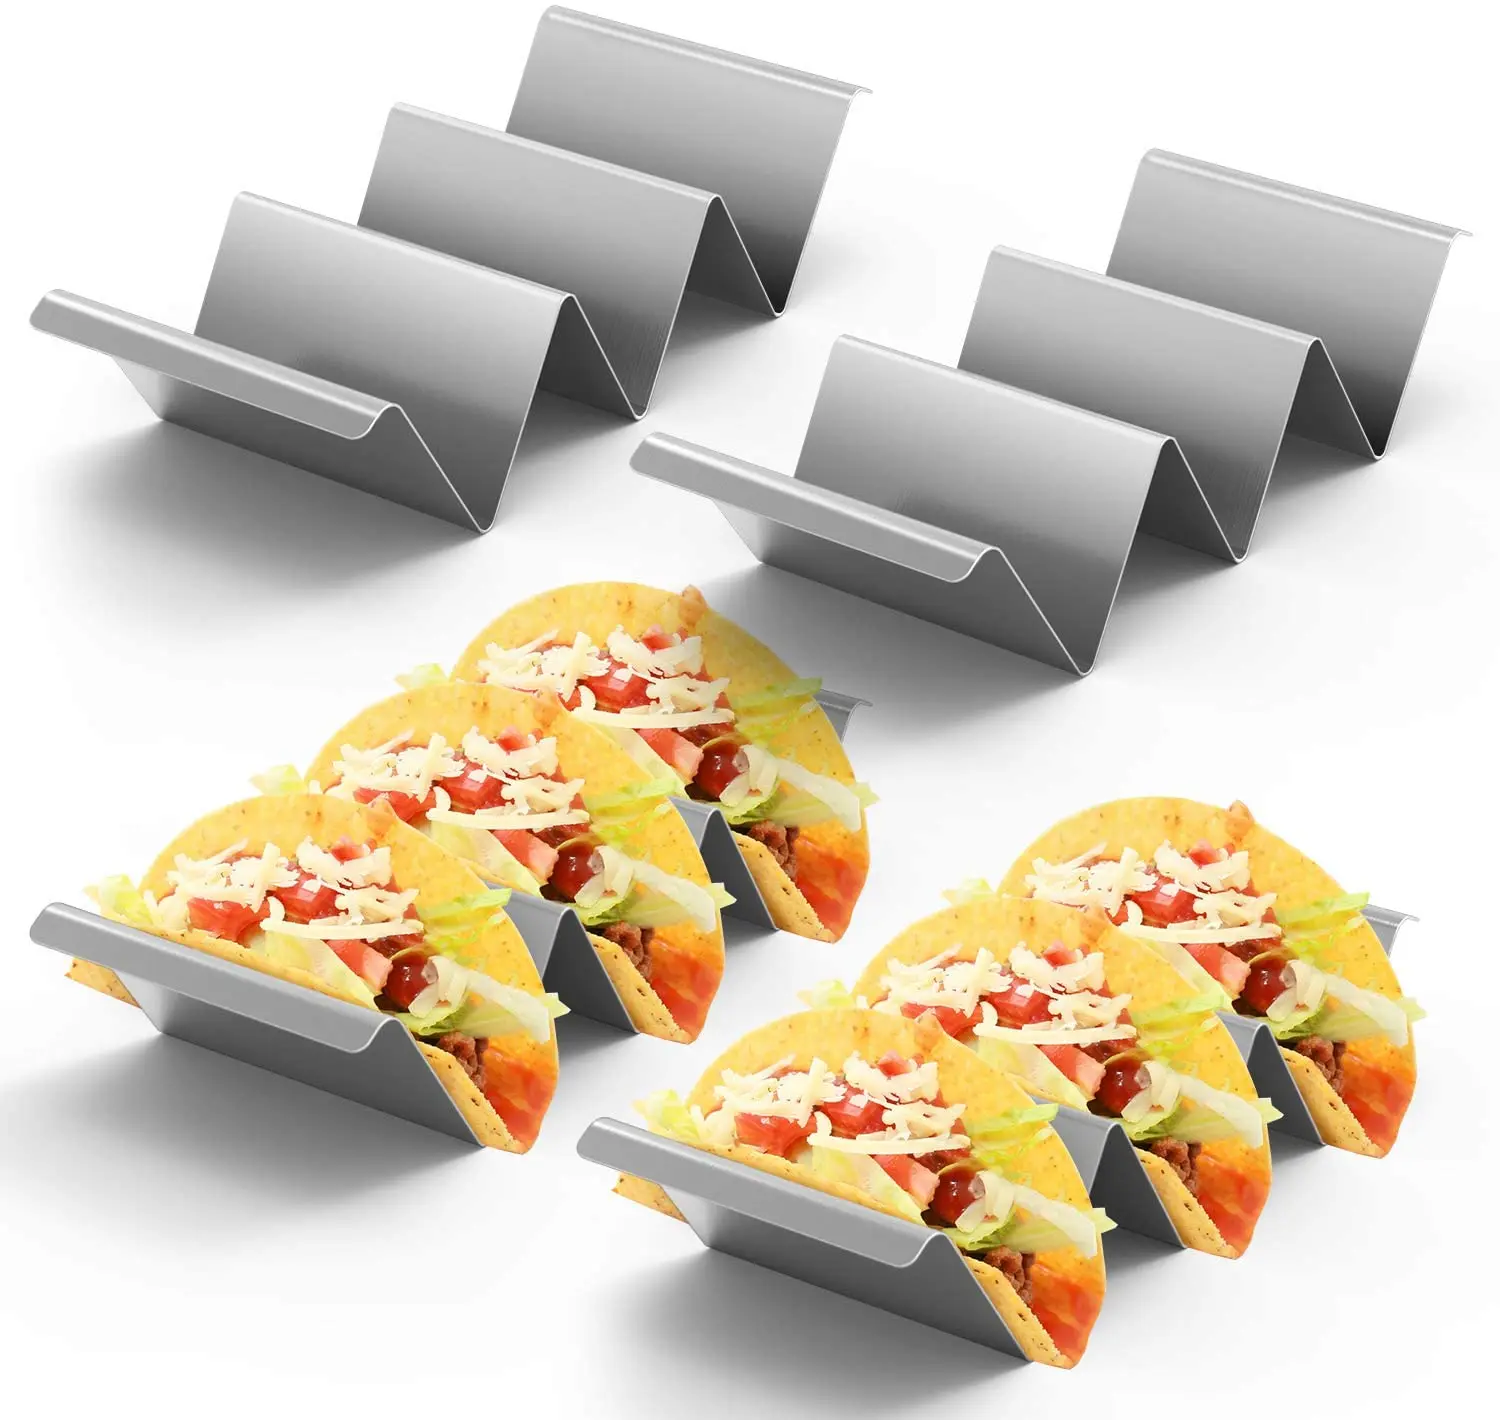 

Nuovoware Taco Holder Stands, Set of 4 Pack Stainless Steel Taco Shell Holder with Handles for Kitchen Oven Grill, Silver